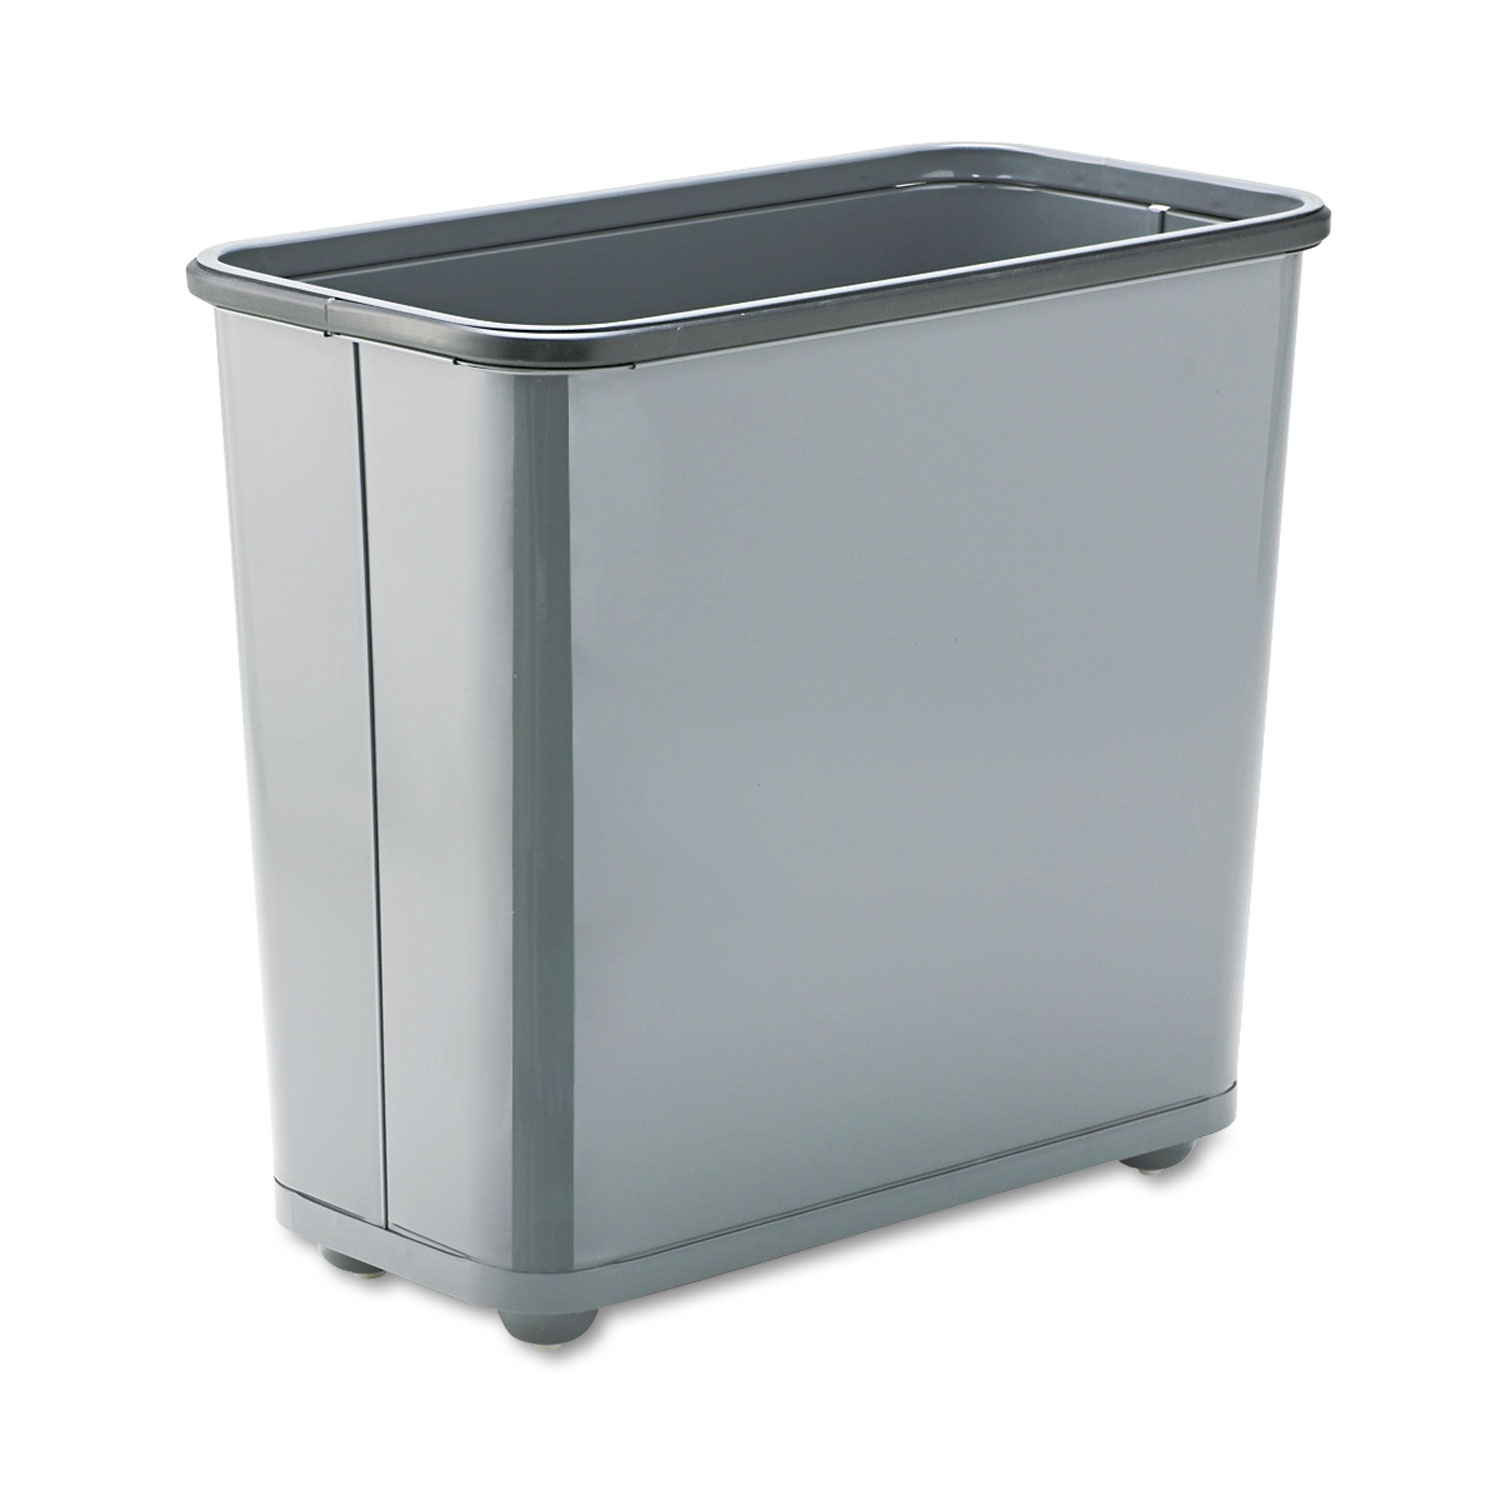  Rubbermaid Commercial FGWB30RGR Fire-Safe Wastebasket, Rectangular, Steel, 7.5 gal, Gray (RCPWB30RGY) 